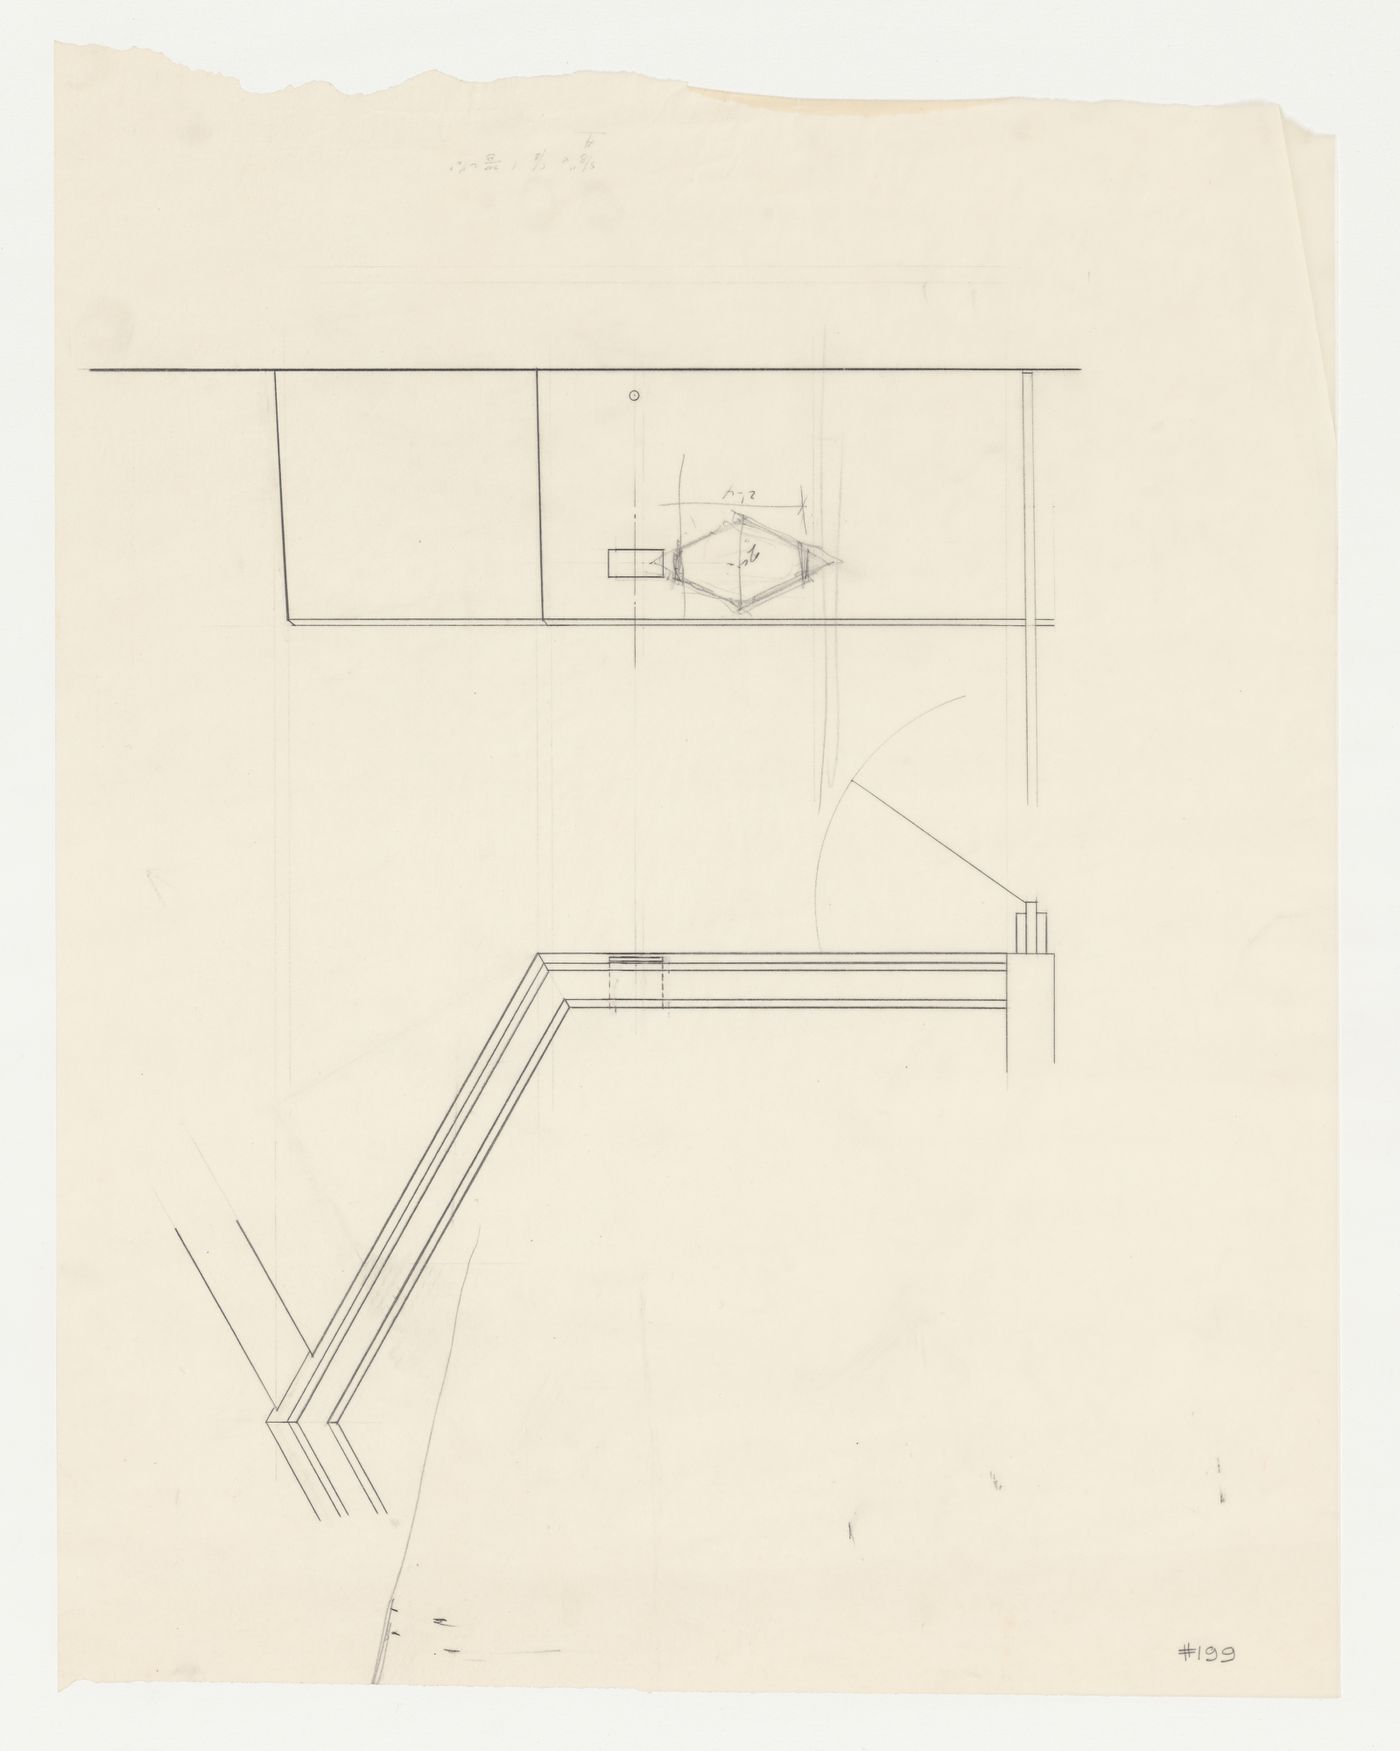 Wayfarers' Chapel, Palos Verdes, California [?]: Elevation and plan, possibly for a moulding